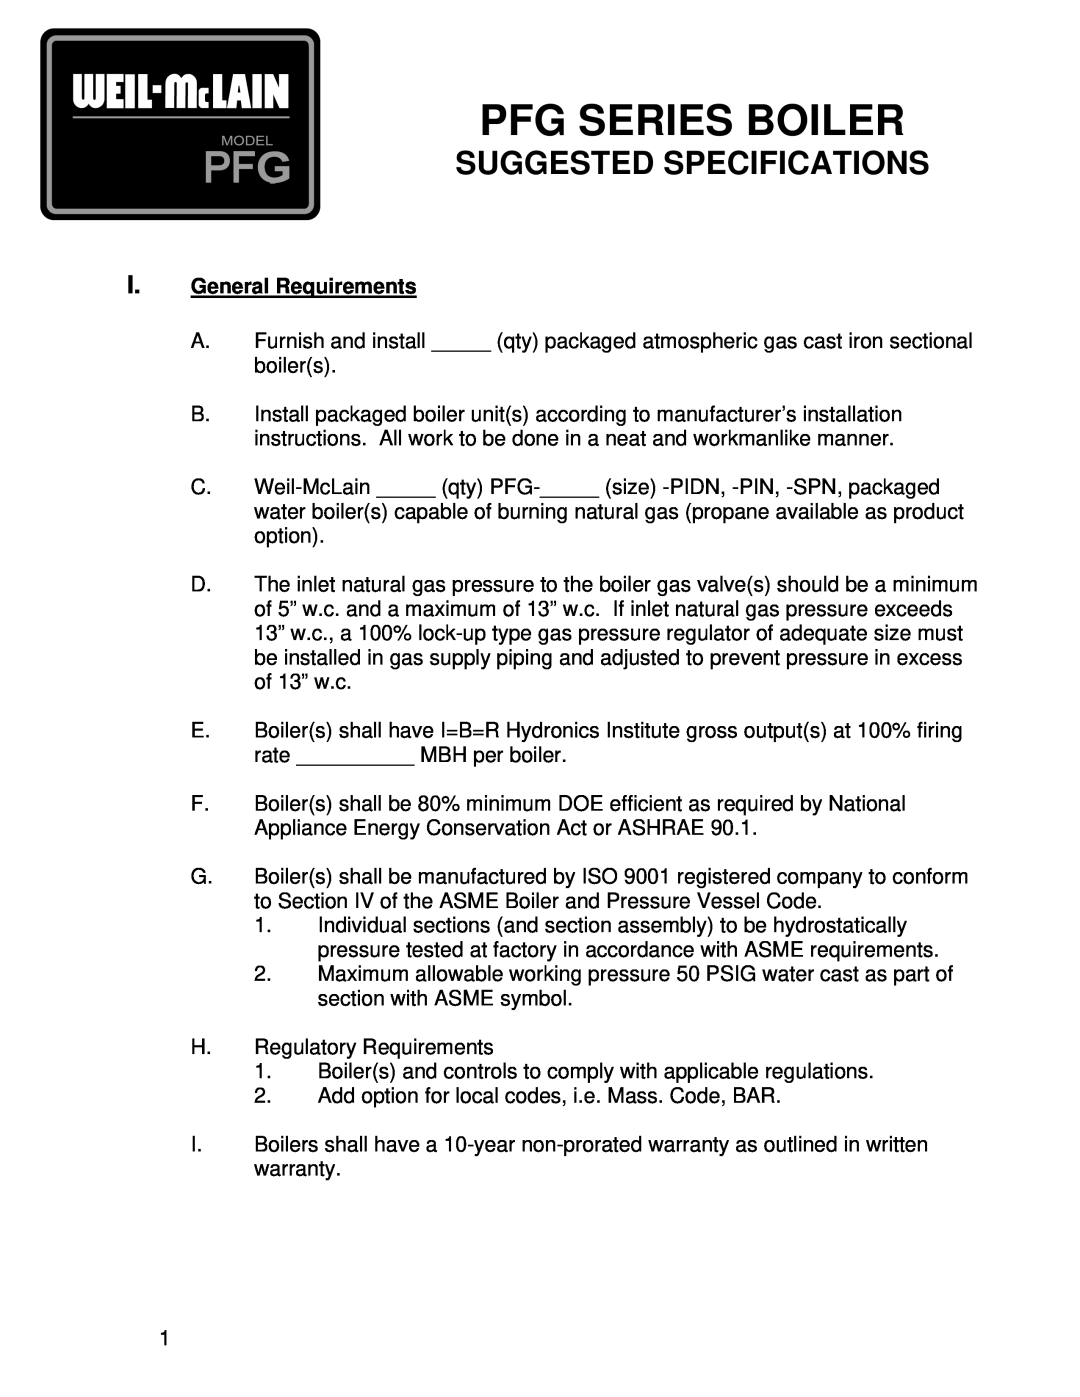 Weil-McLain PFG Series specifications I.General Requirements, Pfg Series Boiler, Suggested Specifications 